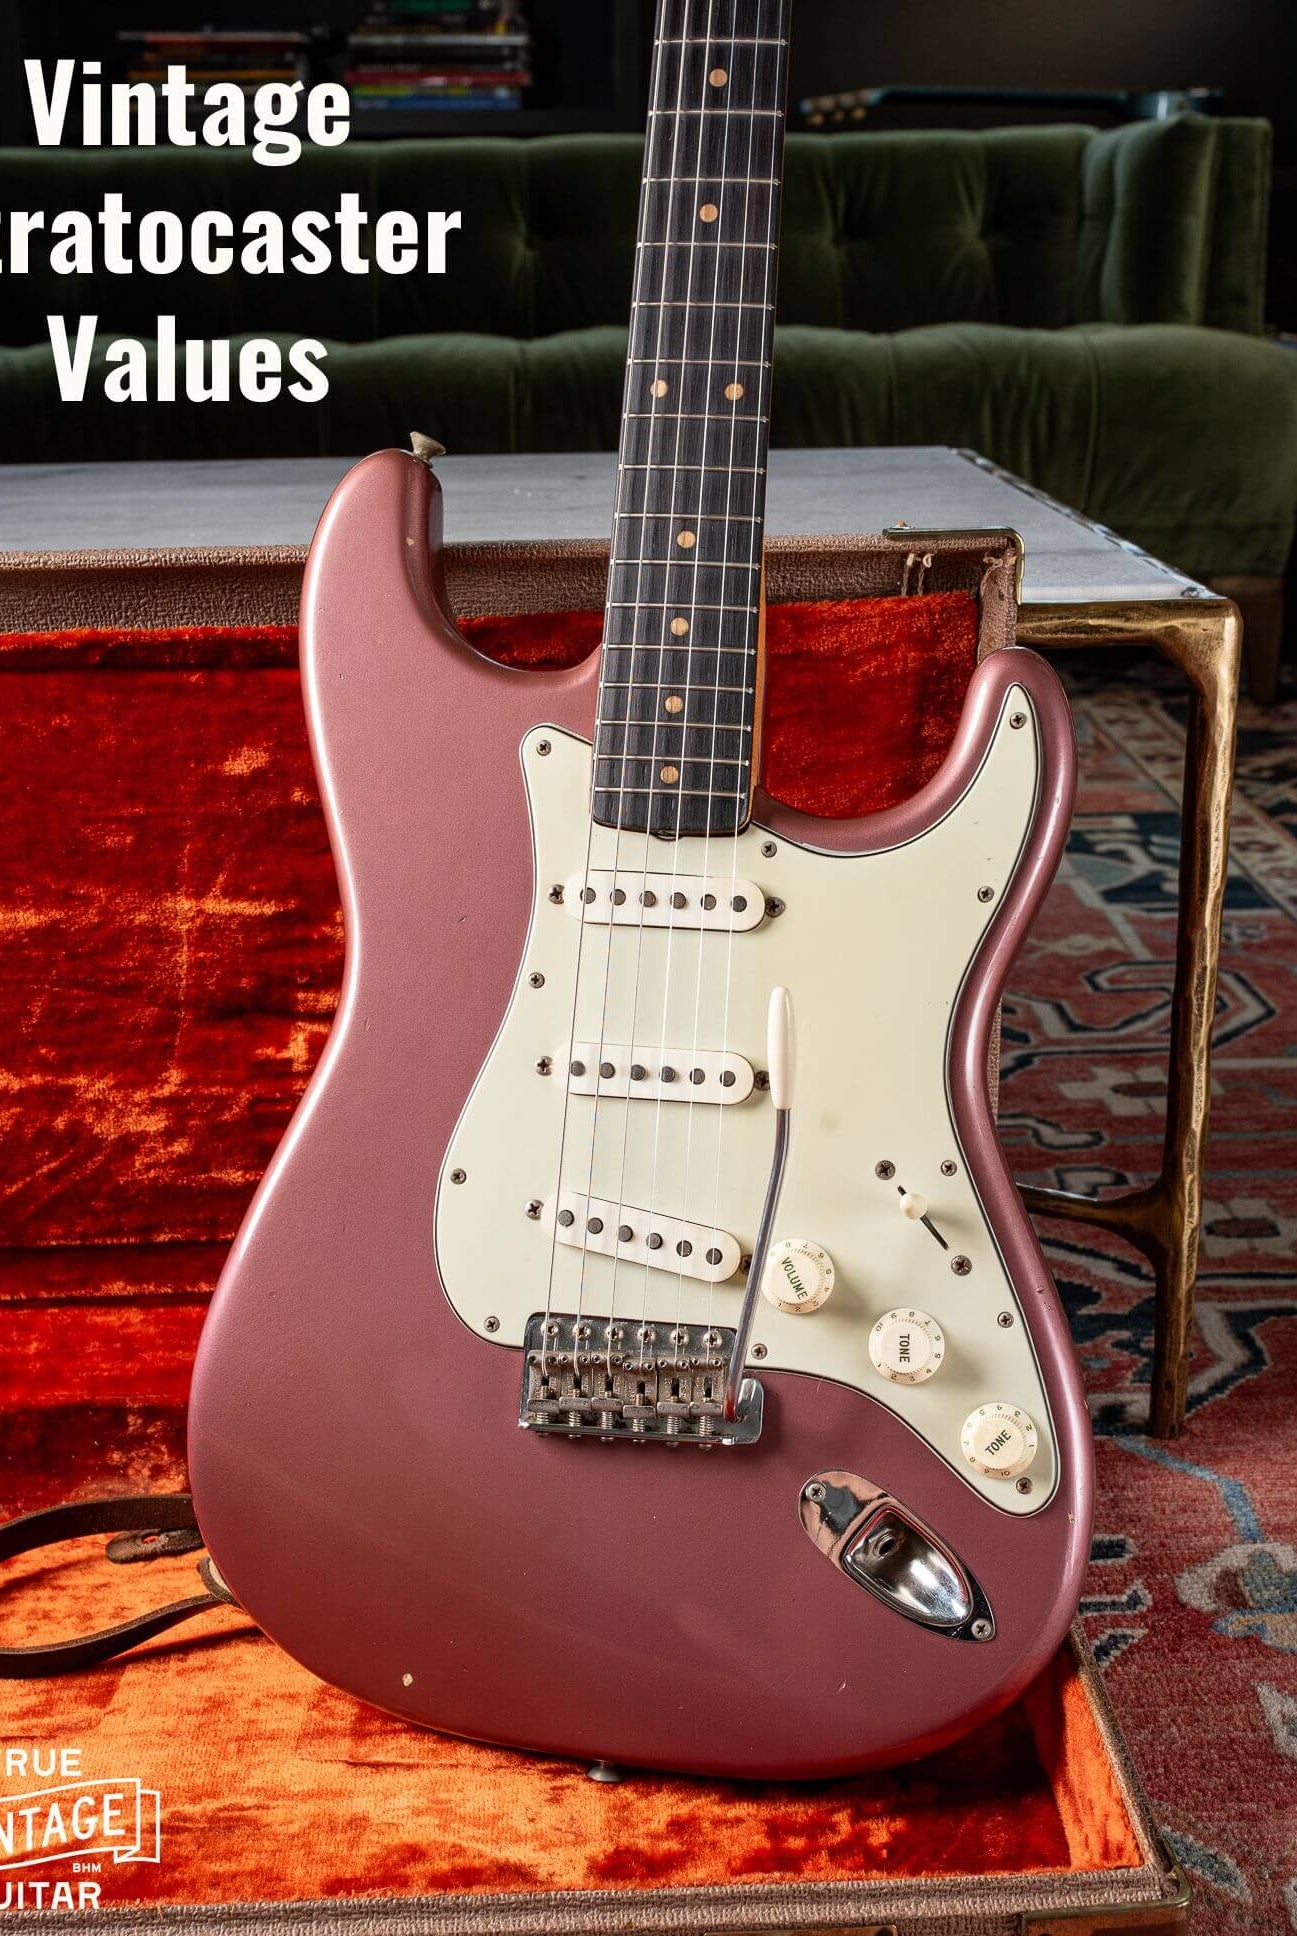 Fender Stratocaster values for 1950s and 1960s guitars